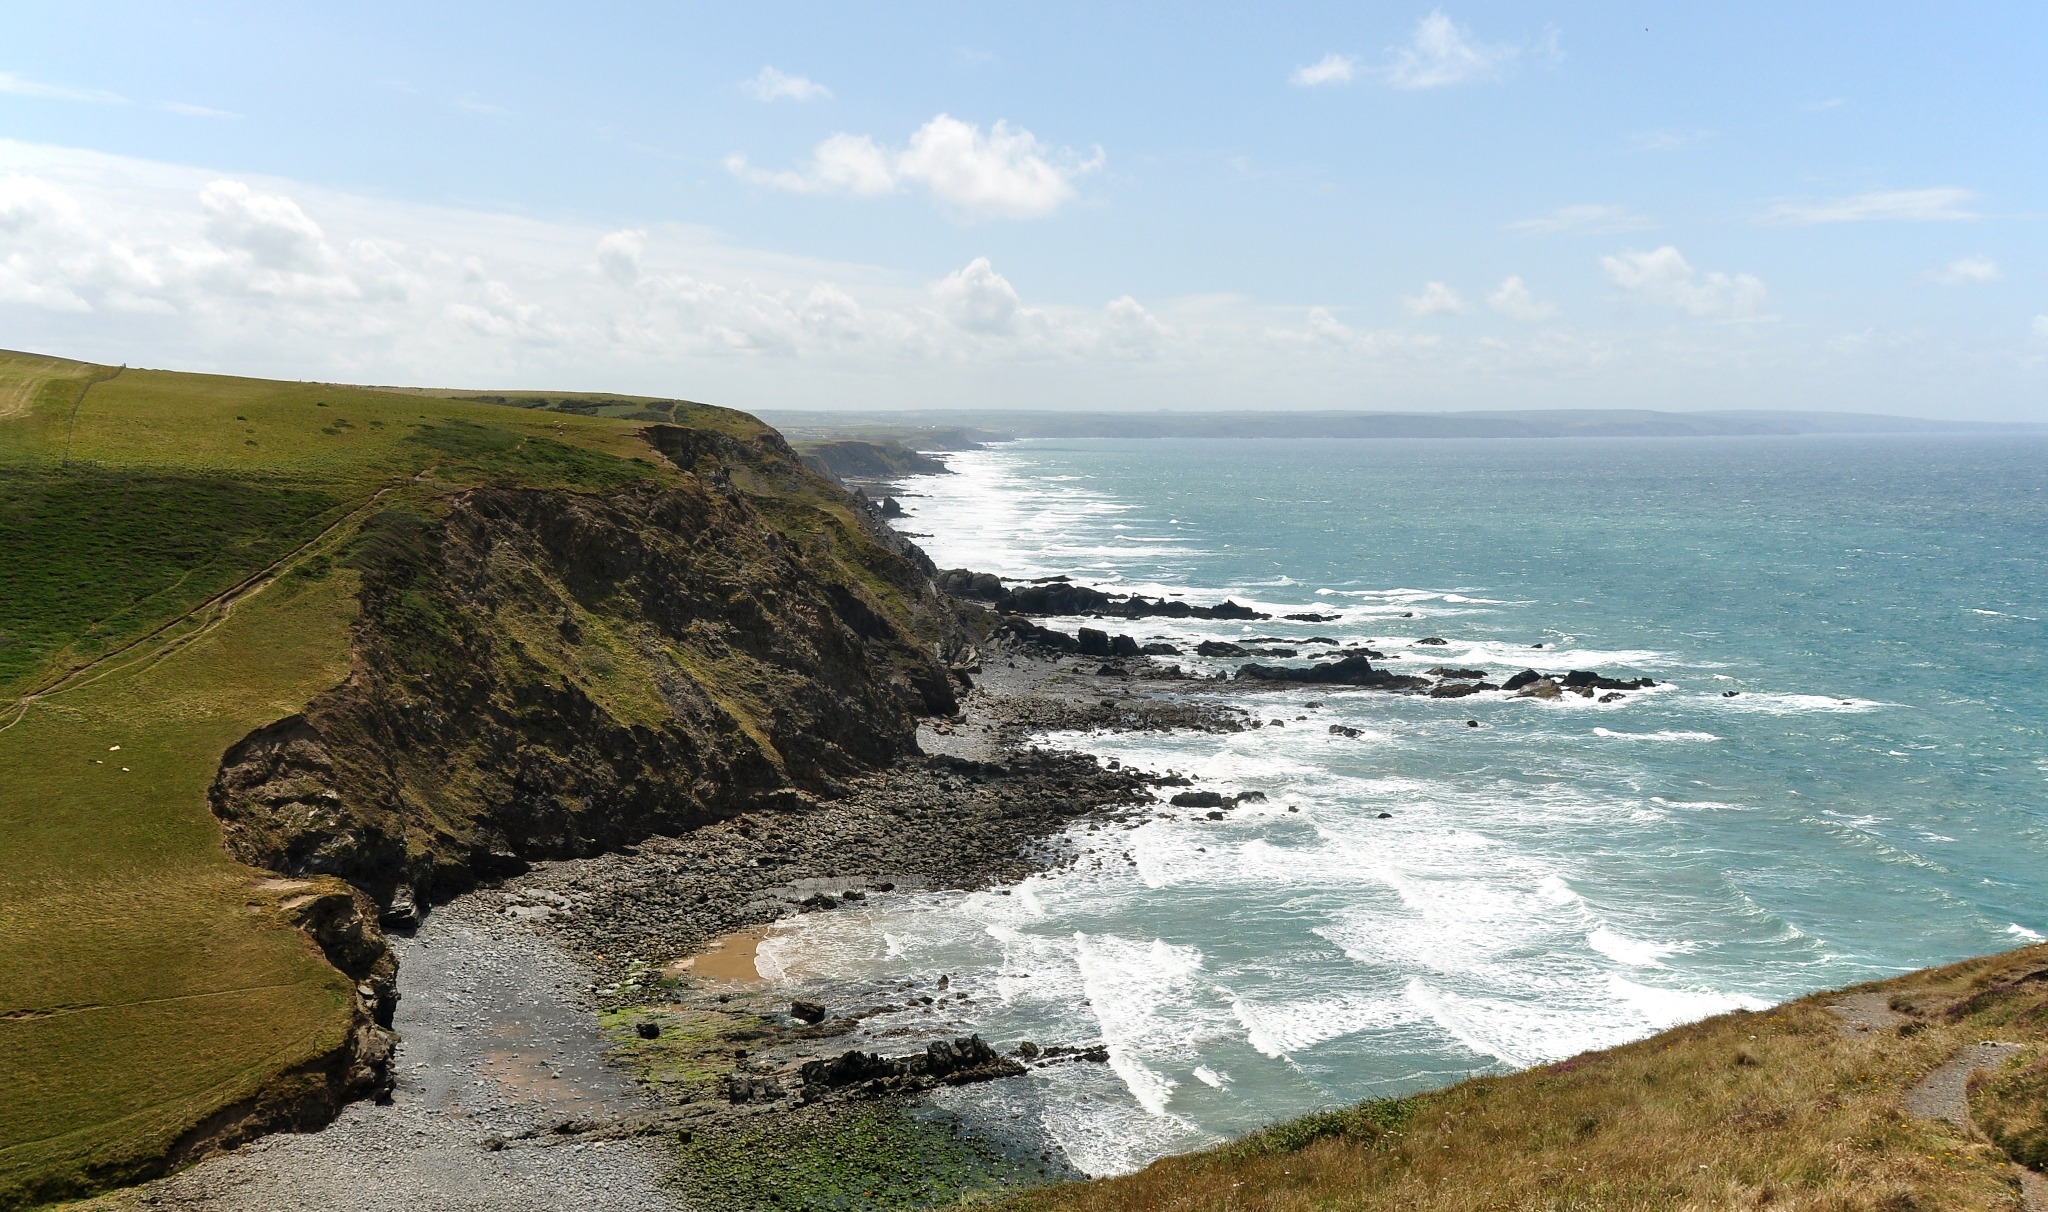 Duckpool Bay, downstream from GCHQ’s Cornwall site. (Photo: Creative Commons)